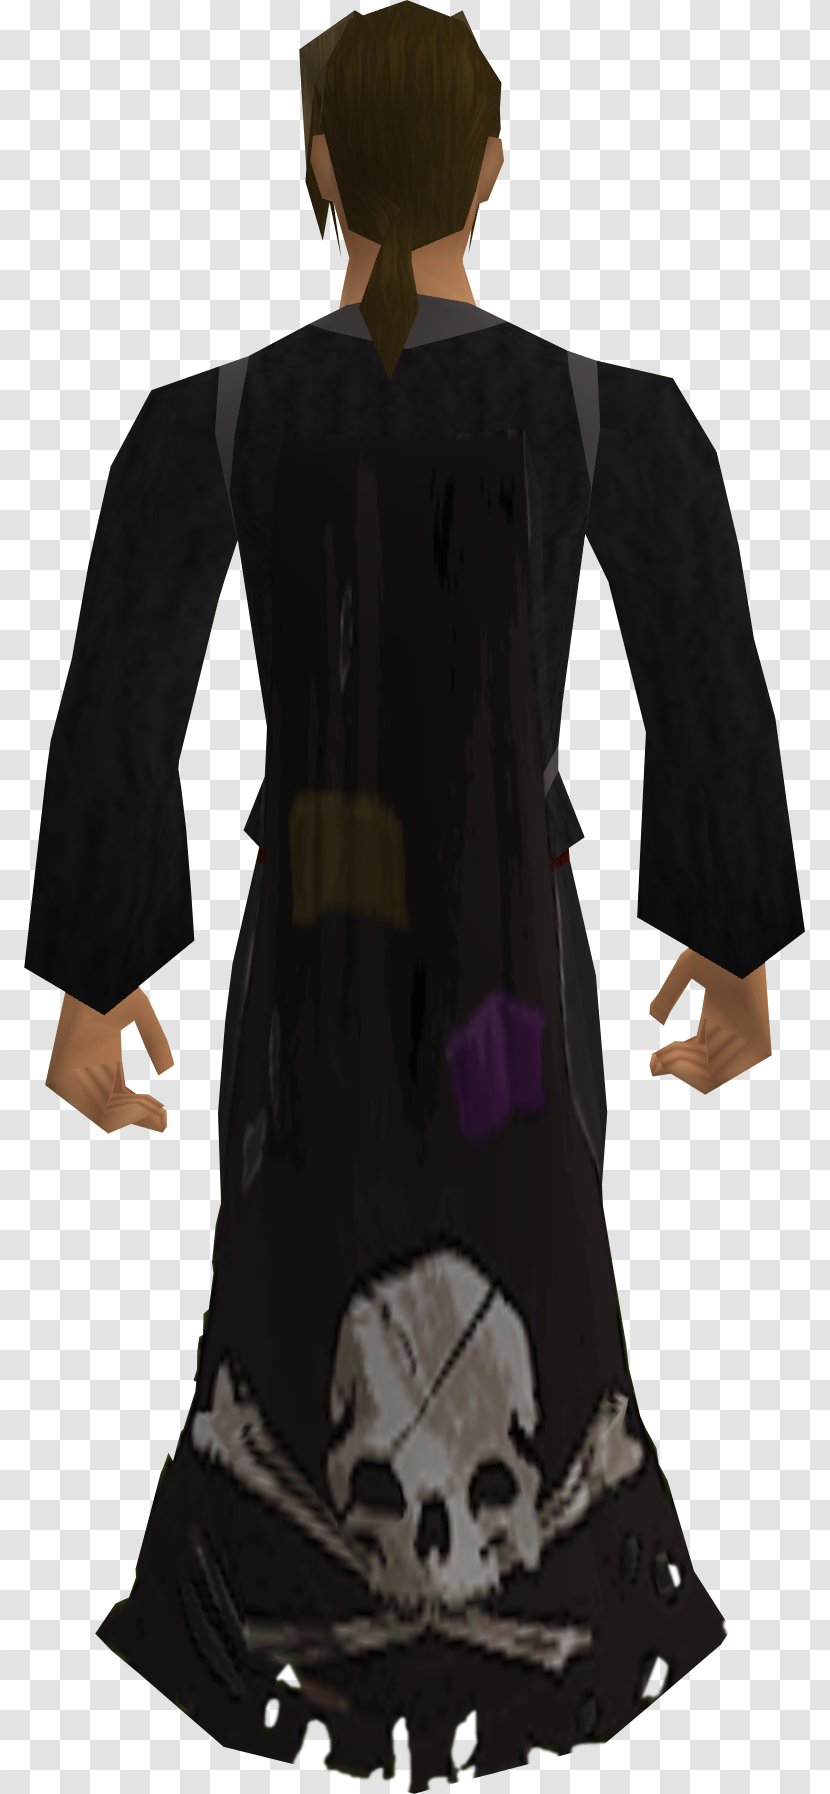 RuneScape Jolly Roger Robe Wikia - Fictional Character - Etsy Transparent PNG